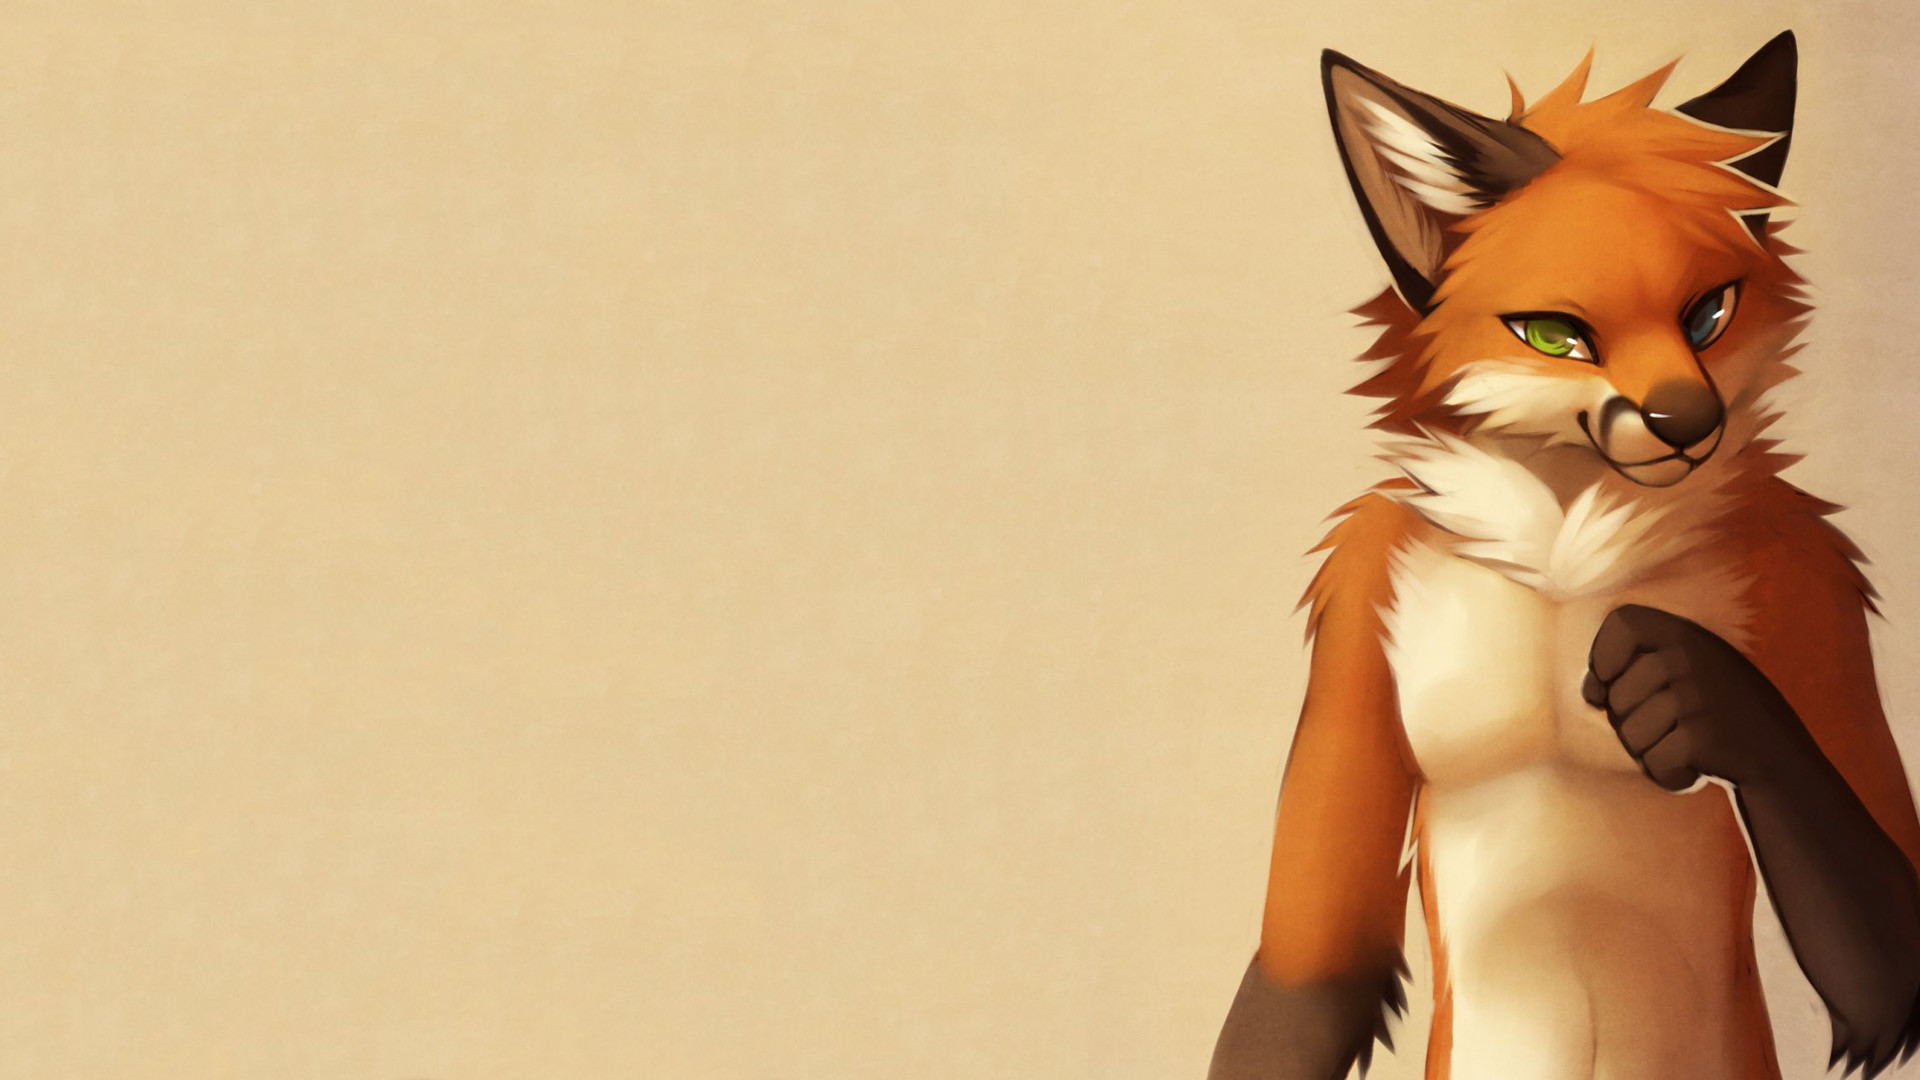 1920x1080 Furry Wallpapers Part 3